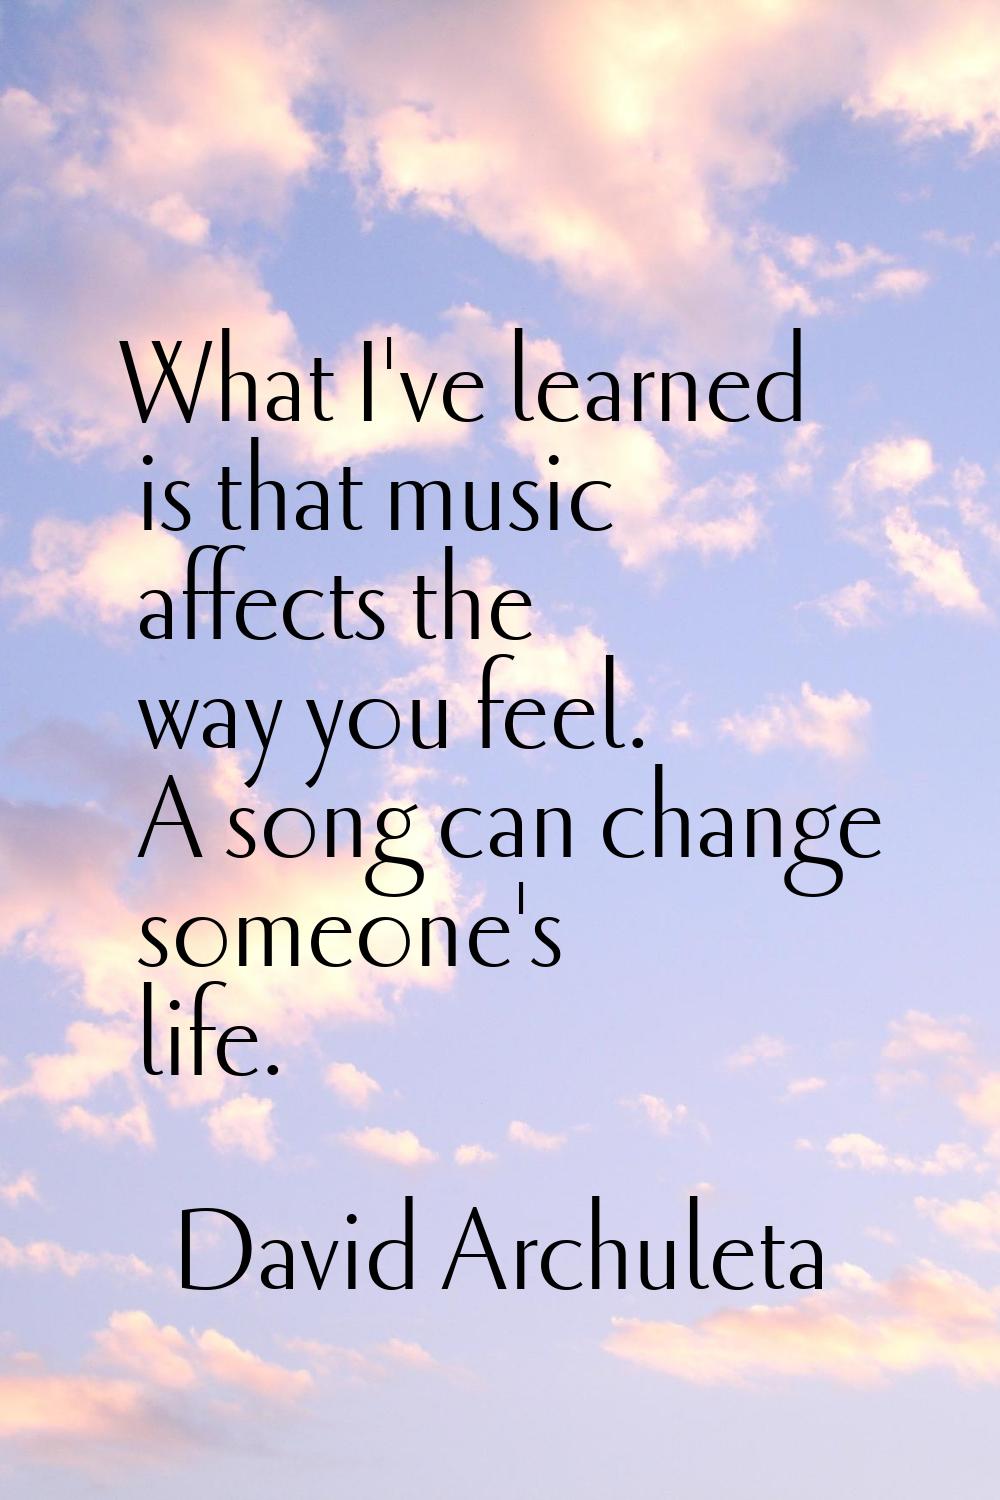 What I've learned is that music affects the way you feel. A song can change someone's life.